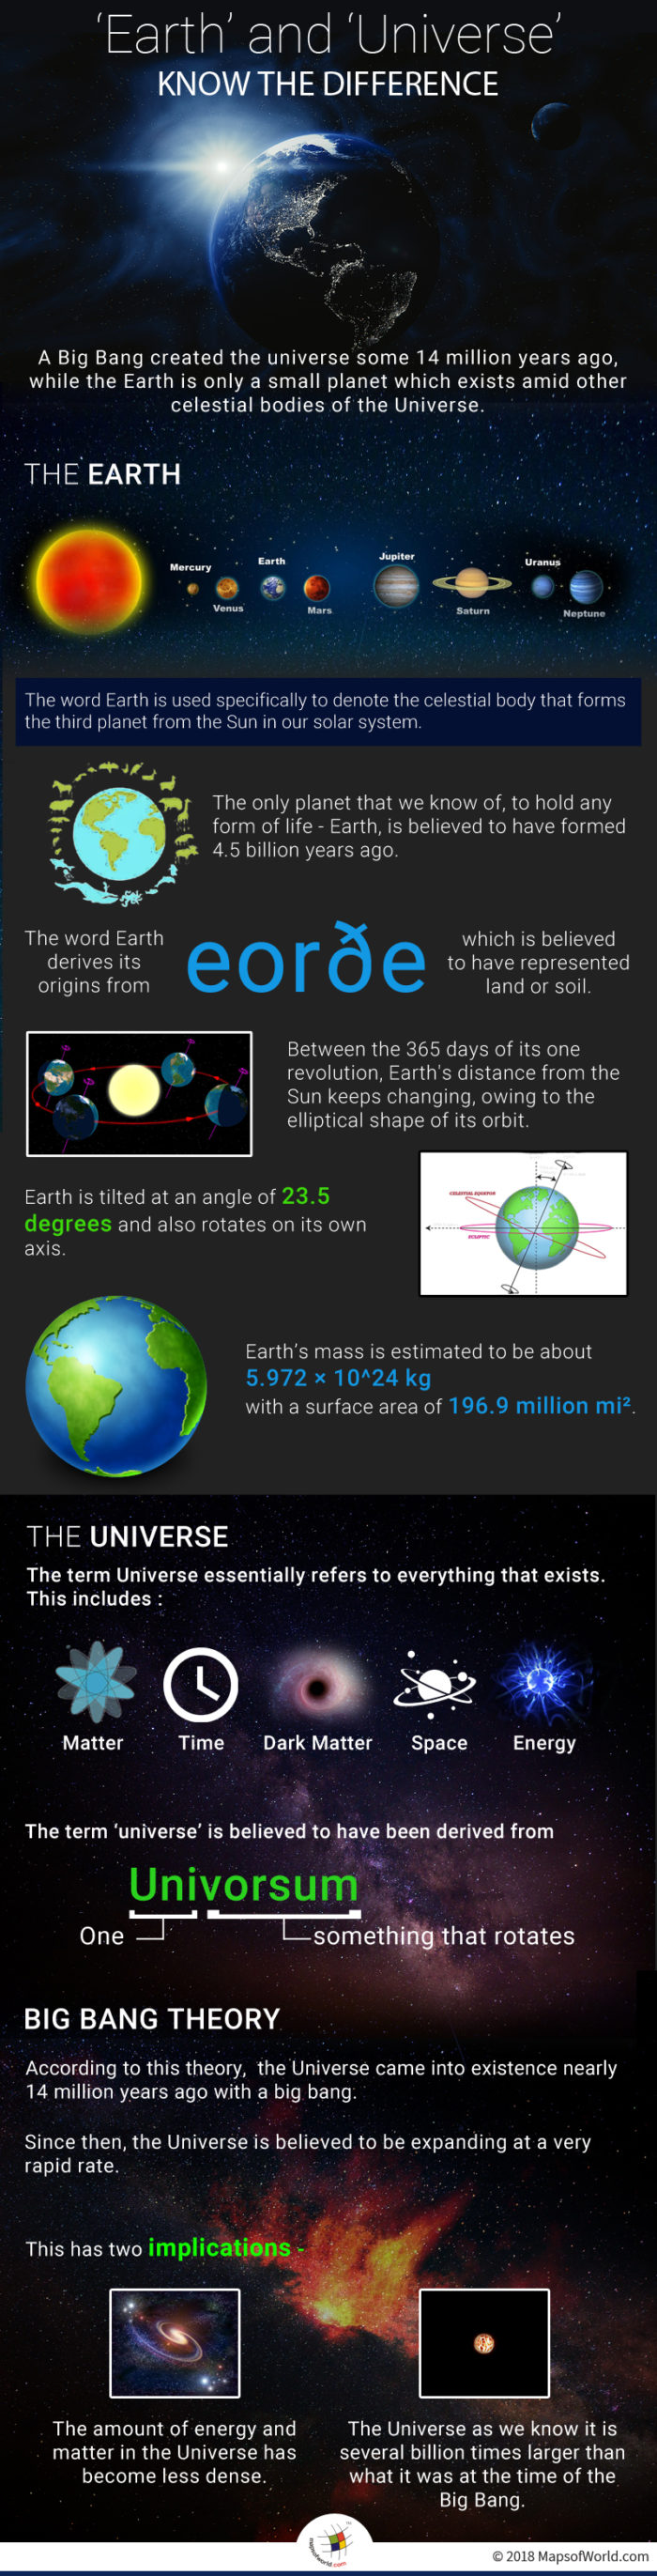 Infographic elaborating aspects of Earth and Universe